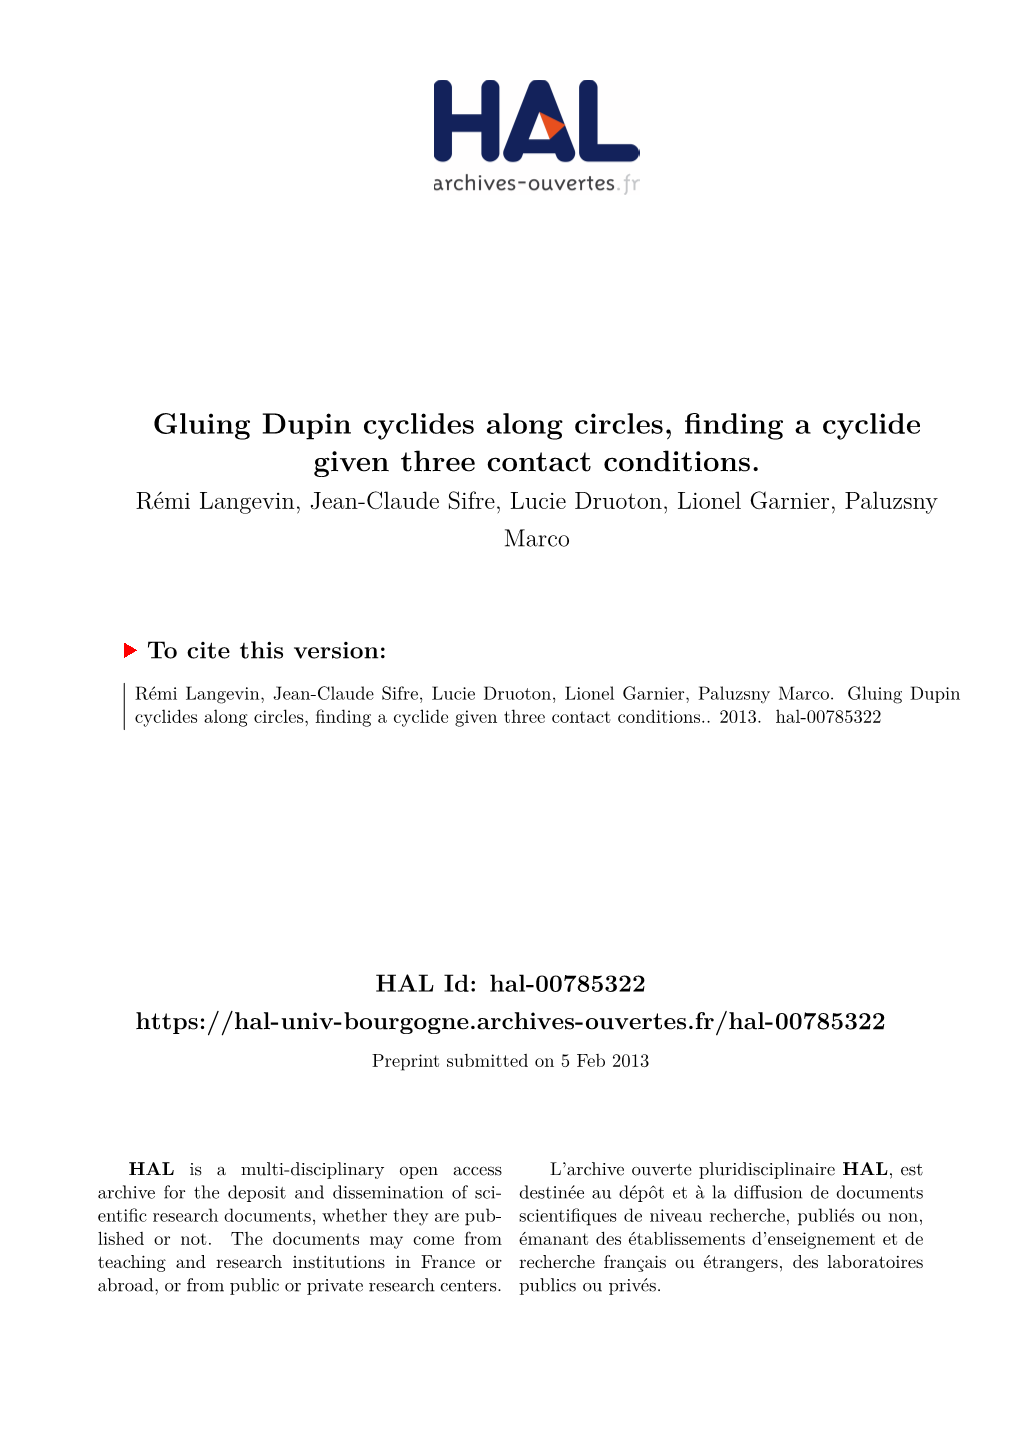 Gluing Dupin Cyclides Along Circles, Finding a Cyclide Given Three Contact Conditions